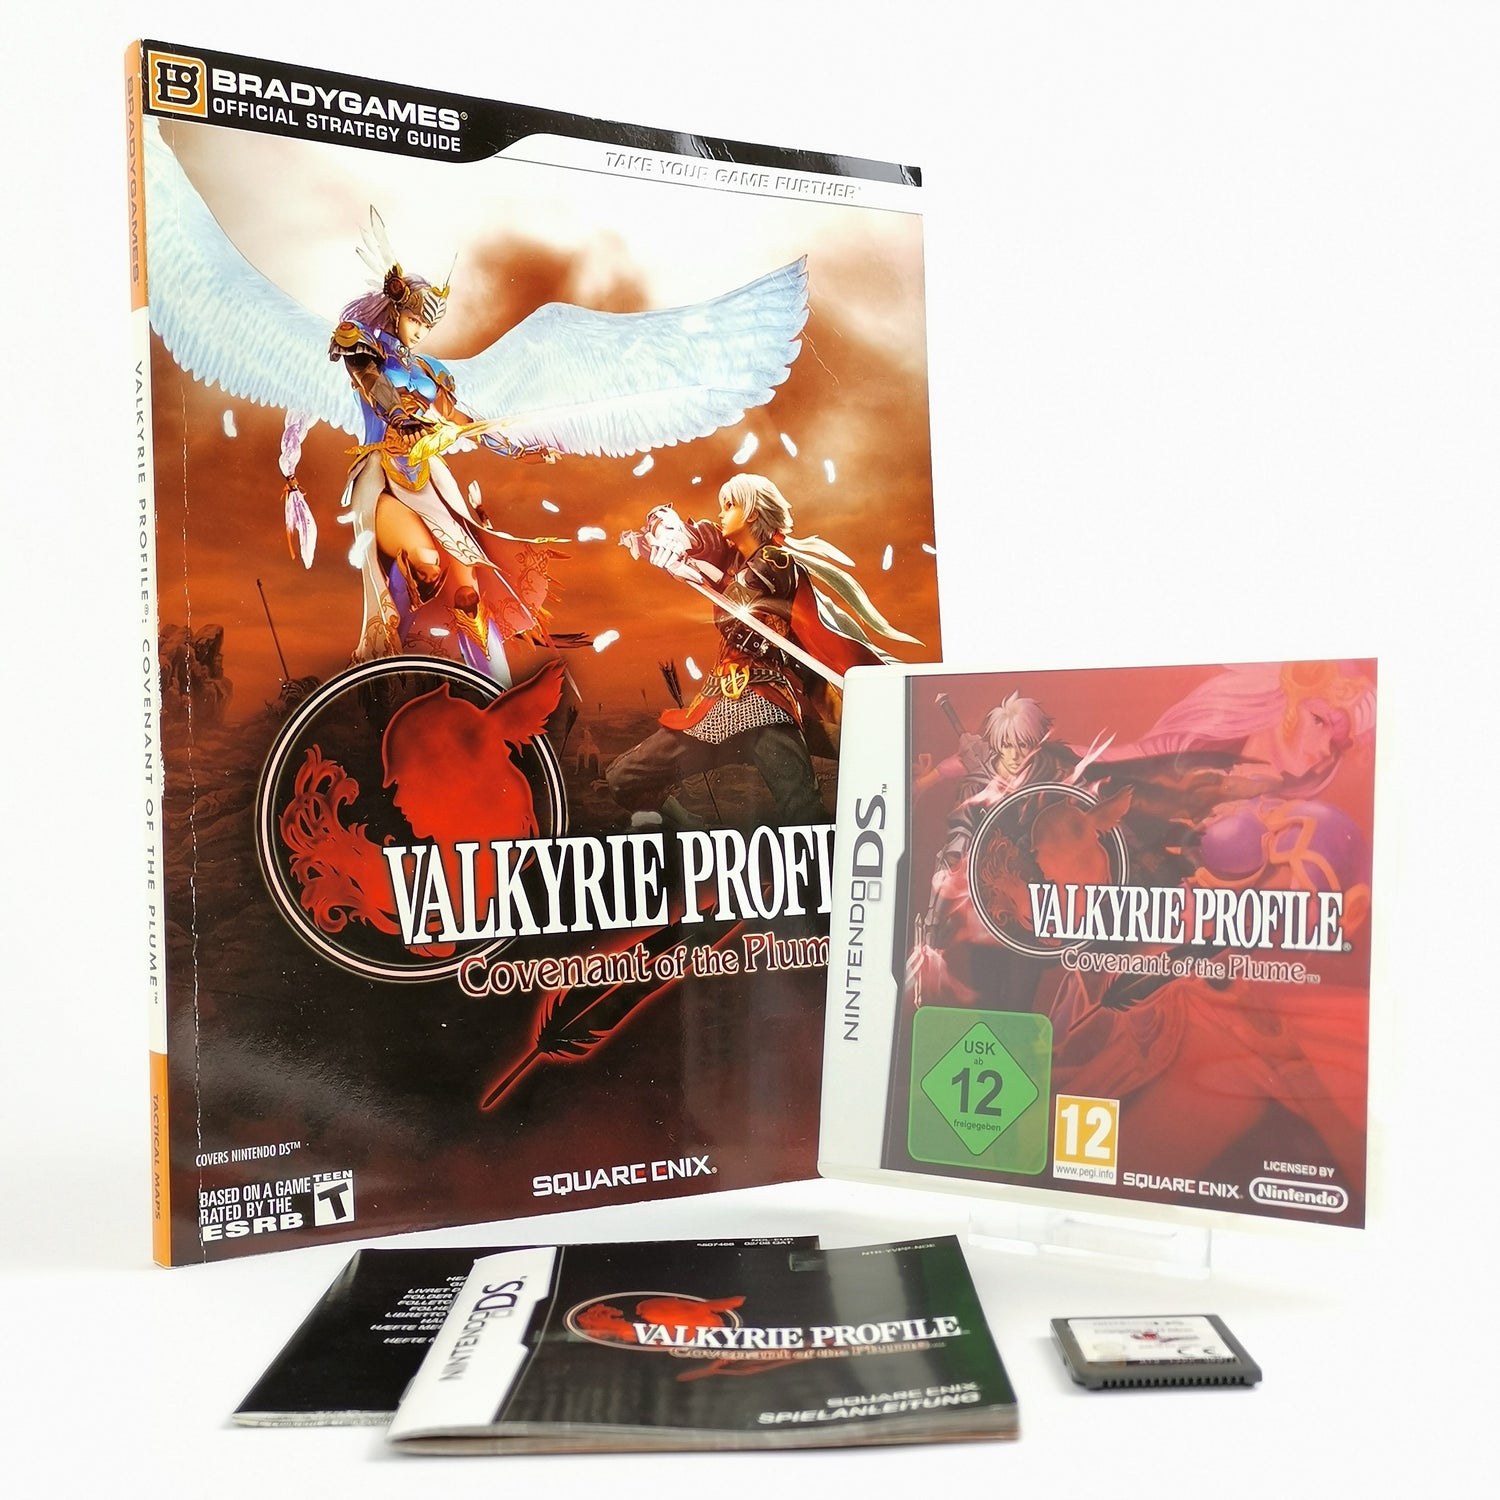 Nintendo DS Game : Valkyrie Profile Covenant of the Plume + Bradygames Guide